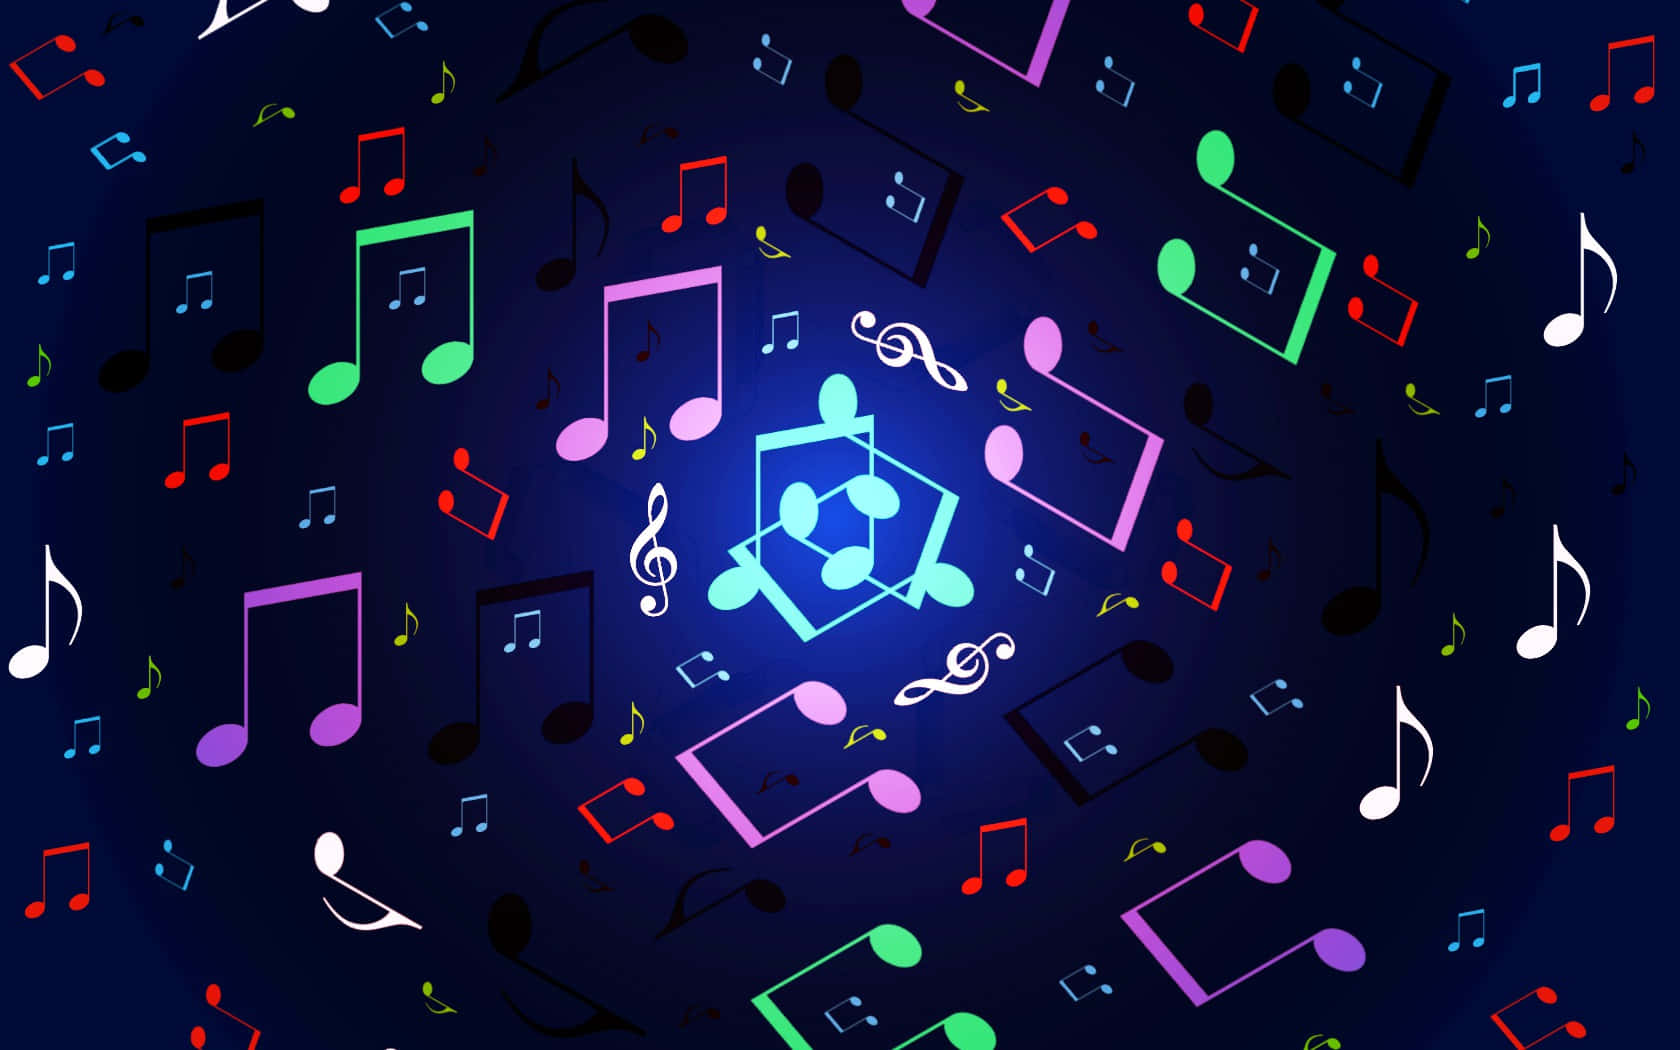 Musical notes come alive Wallpaper